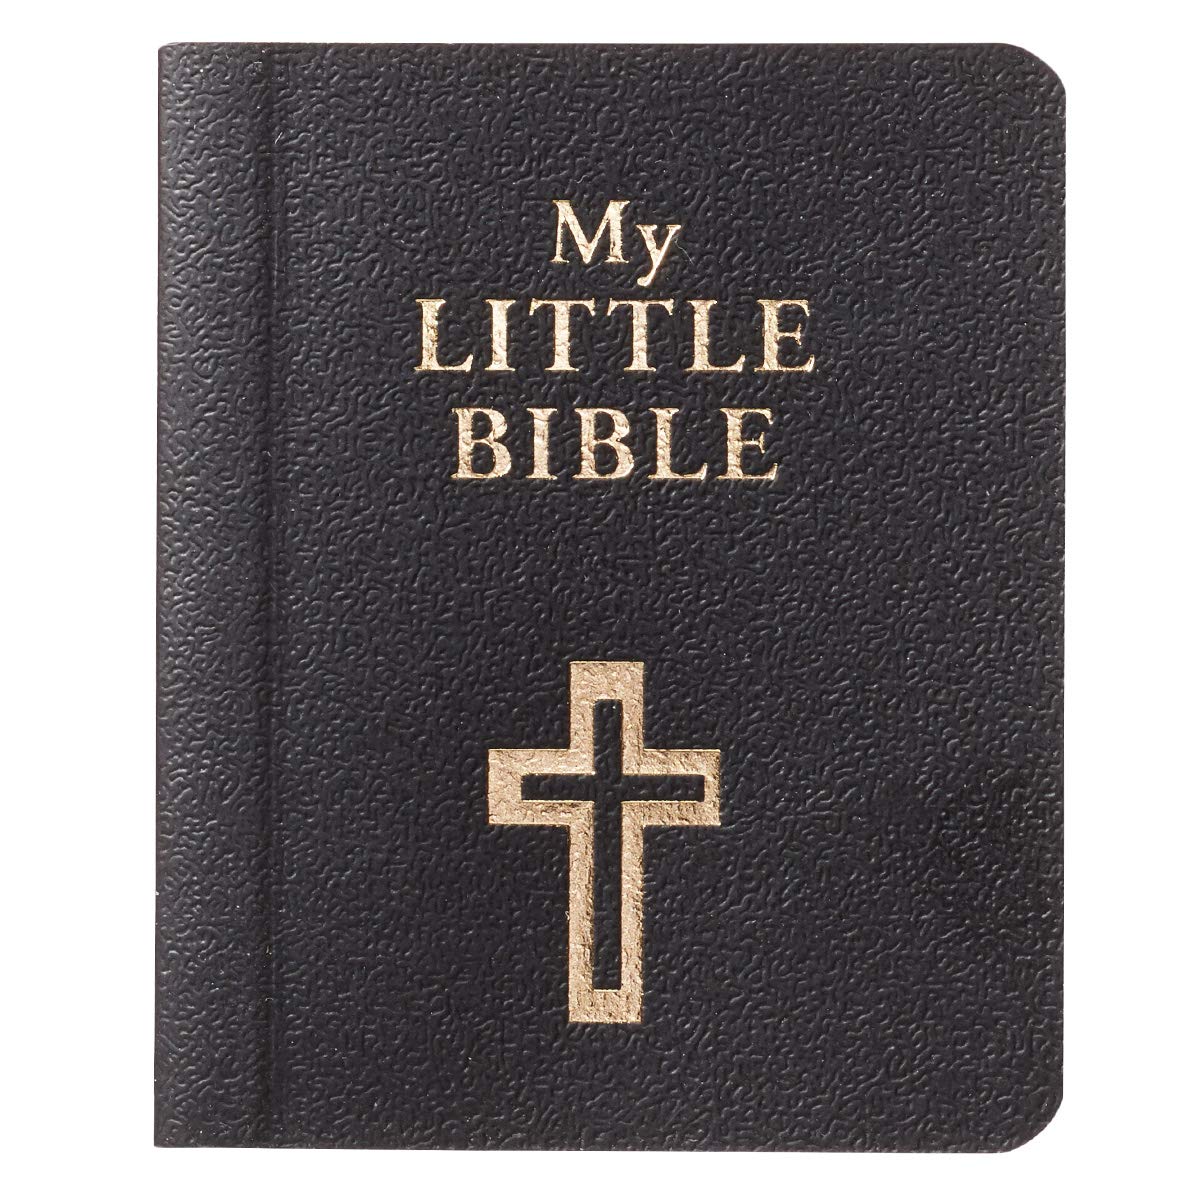 My Little Bible 2” Illustrated Edition - Selections of Key Verses From Every Book, Tiny Palm-size OT NT Scripture for Ministry Outreach, Classic 1769 KJV Text, 2